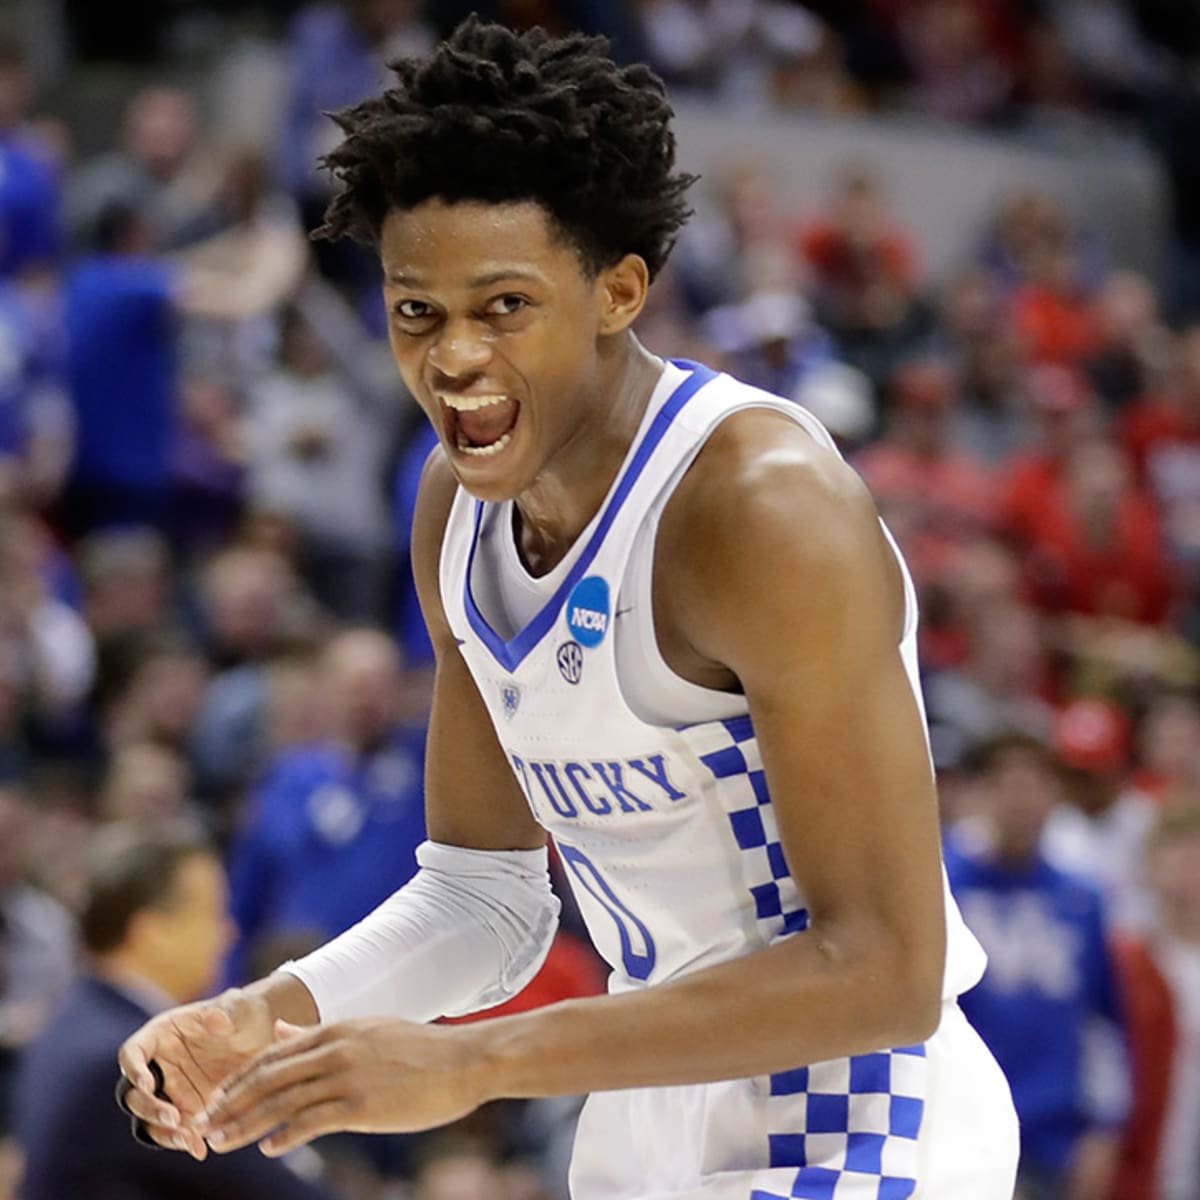 De'Aaron Fox knows his speed is valuable in the NBA